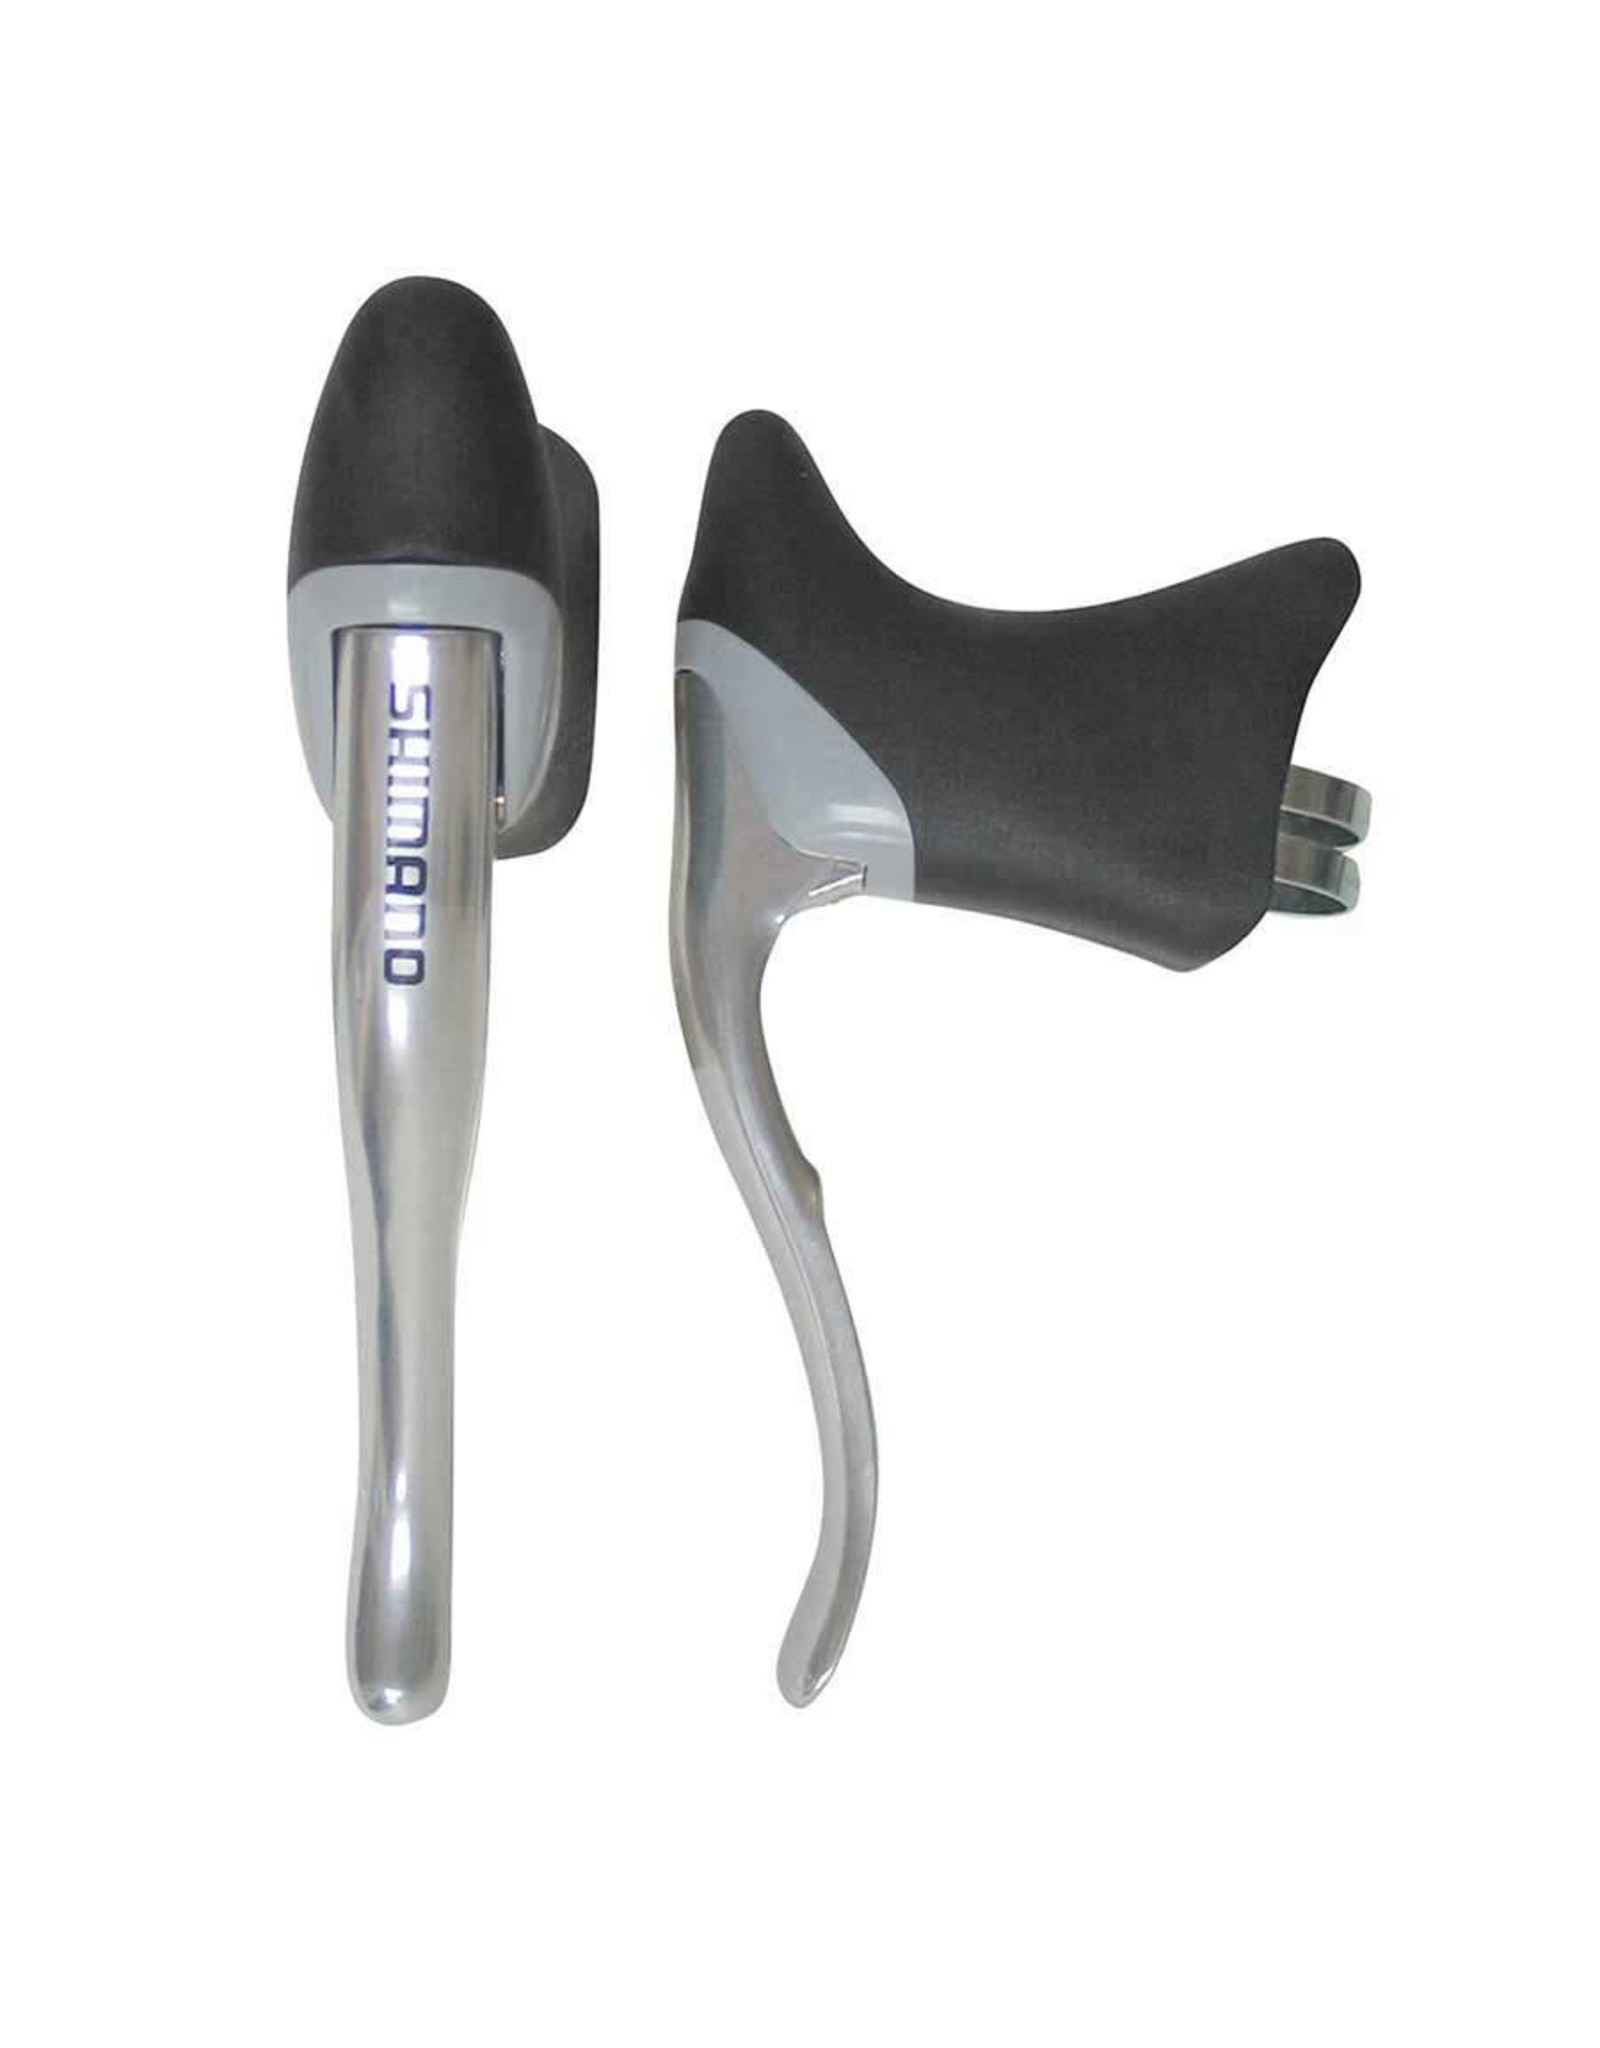 Shimano Shimano Sora BL-R400K Drop Bar Brake Levers, Silver w/ Black Hoods, includes cables and housing